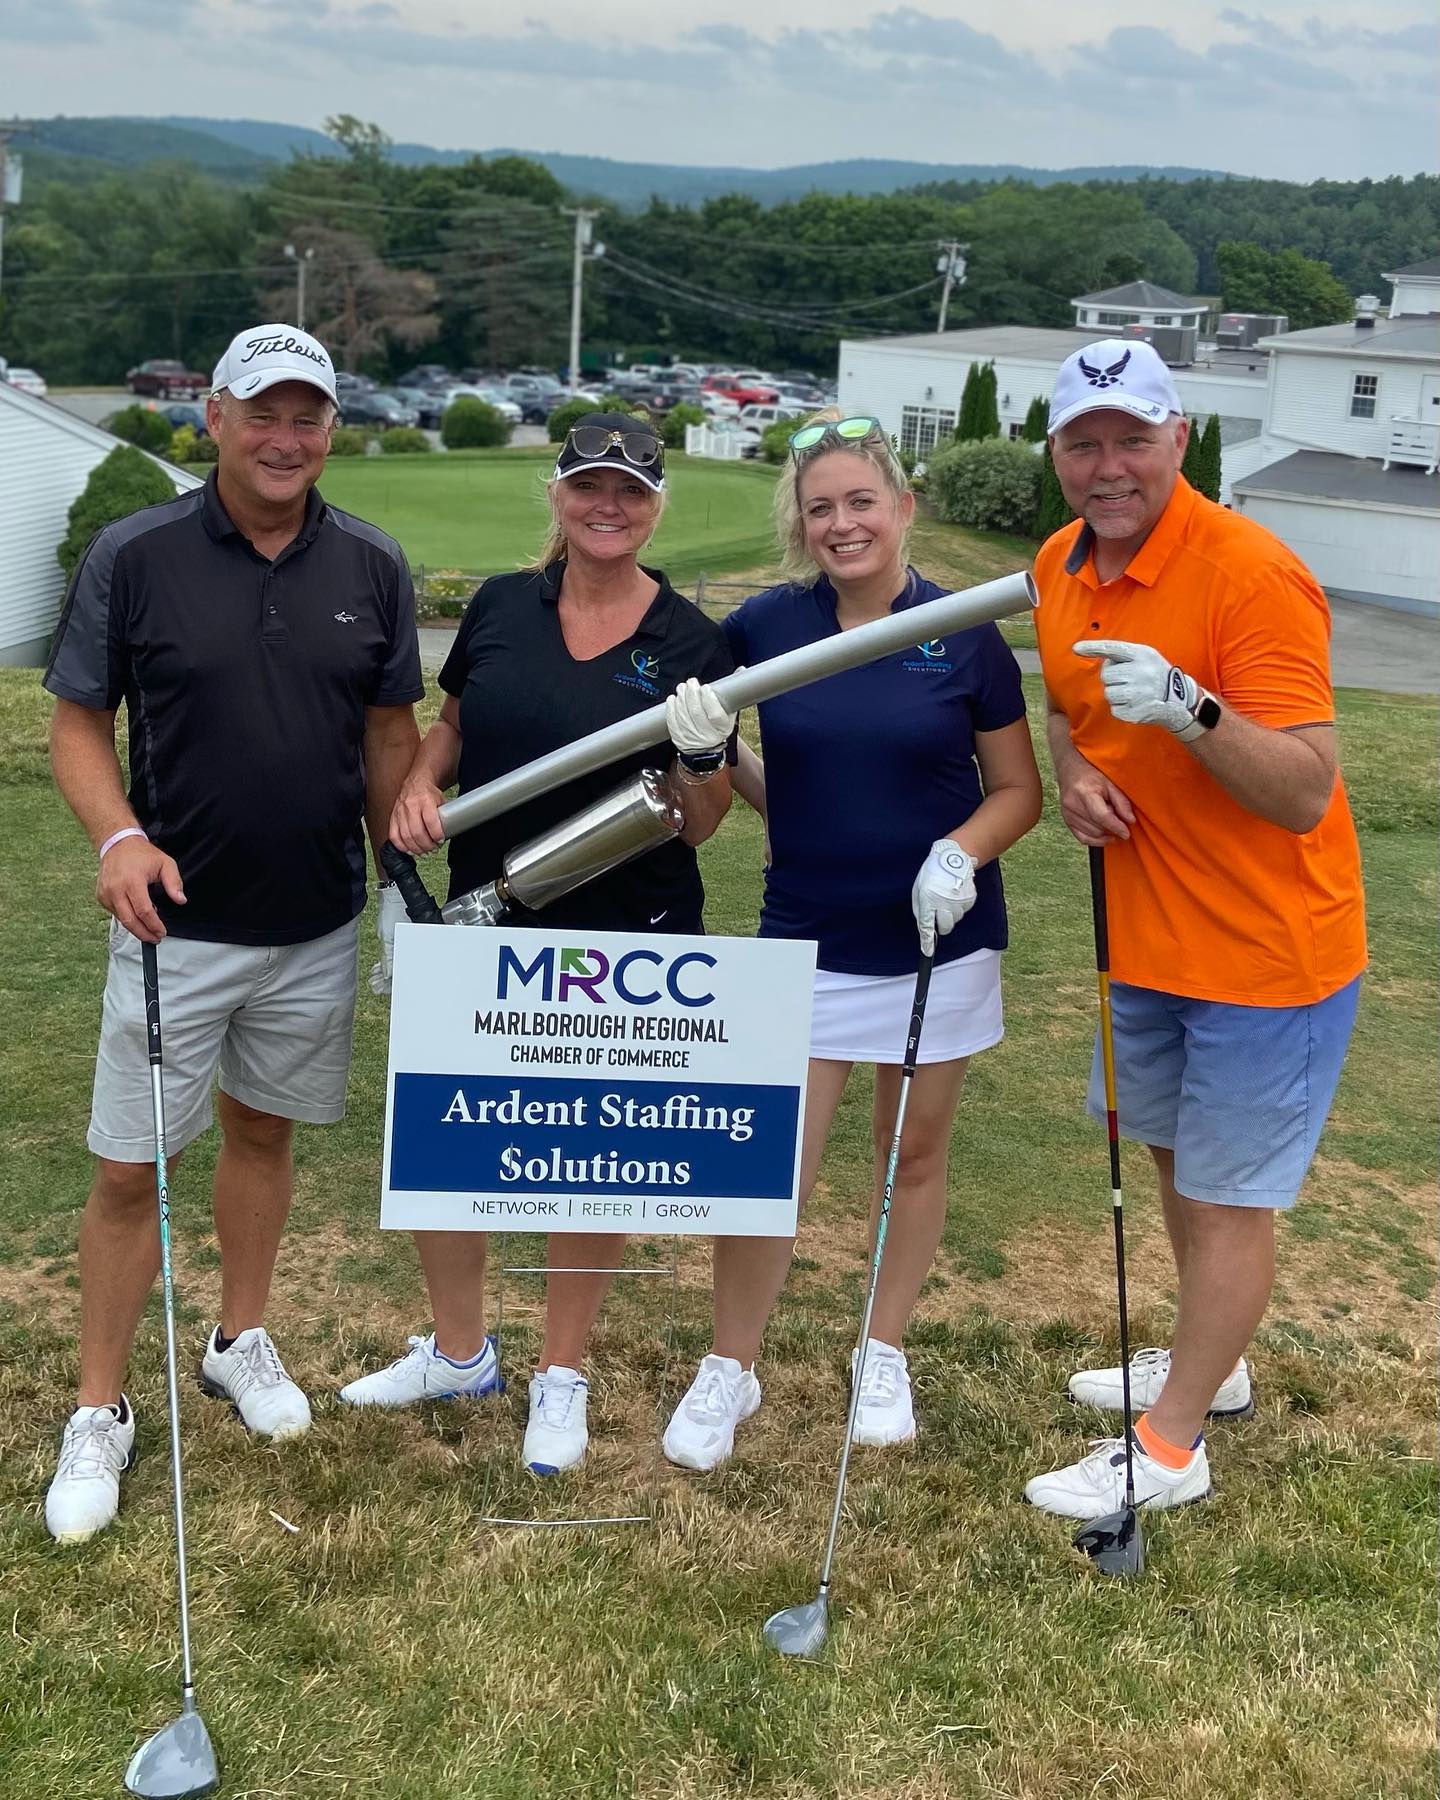 What a great day golfing today at the @marlboroughchamber golf tournament at @marlboroughcountryclub!! Our score may not have been that very top of the leaderboard, but we had a darn good time.